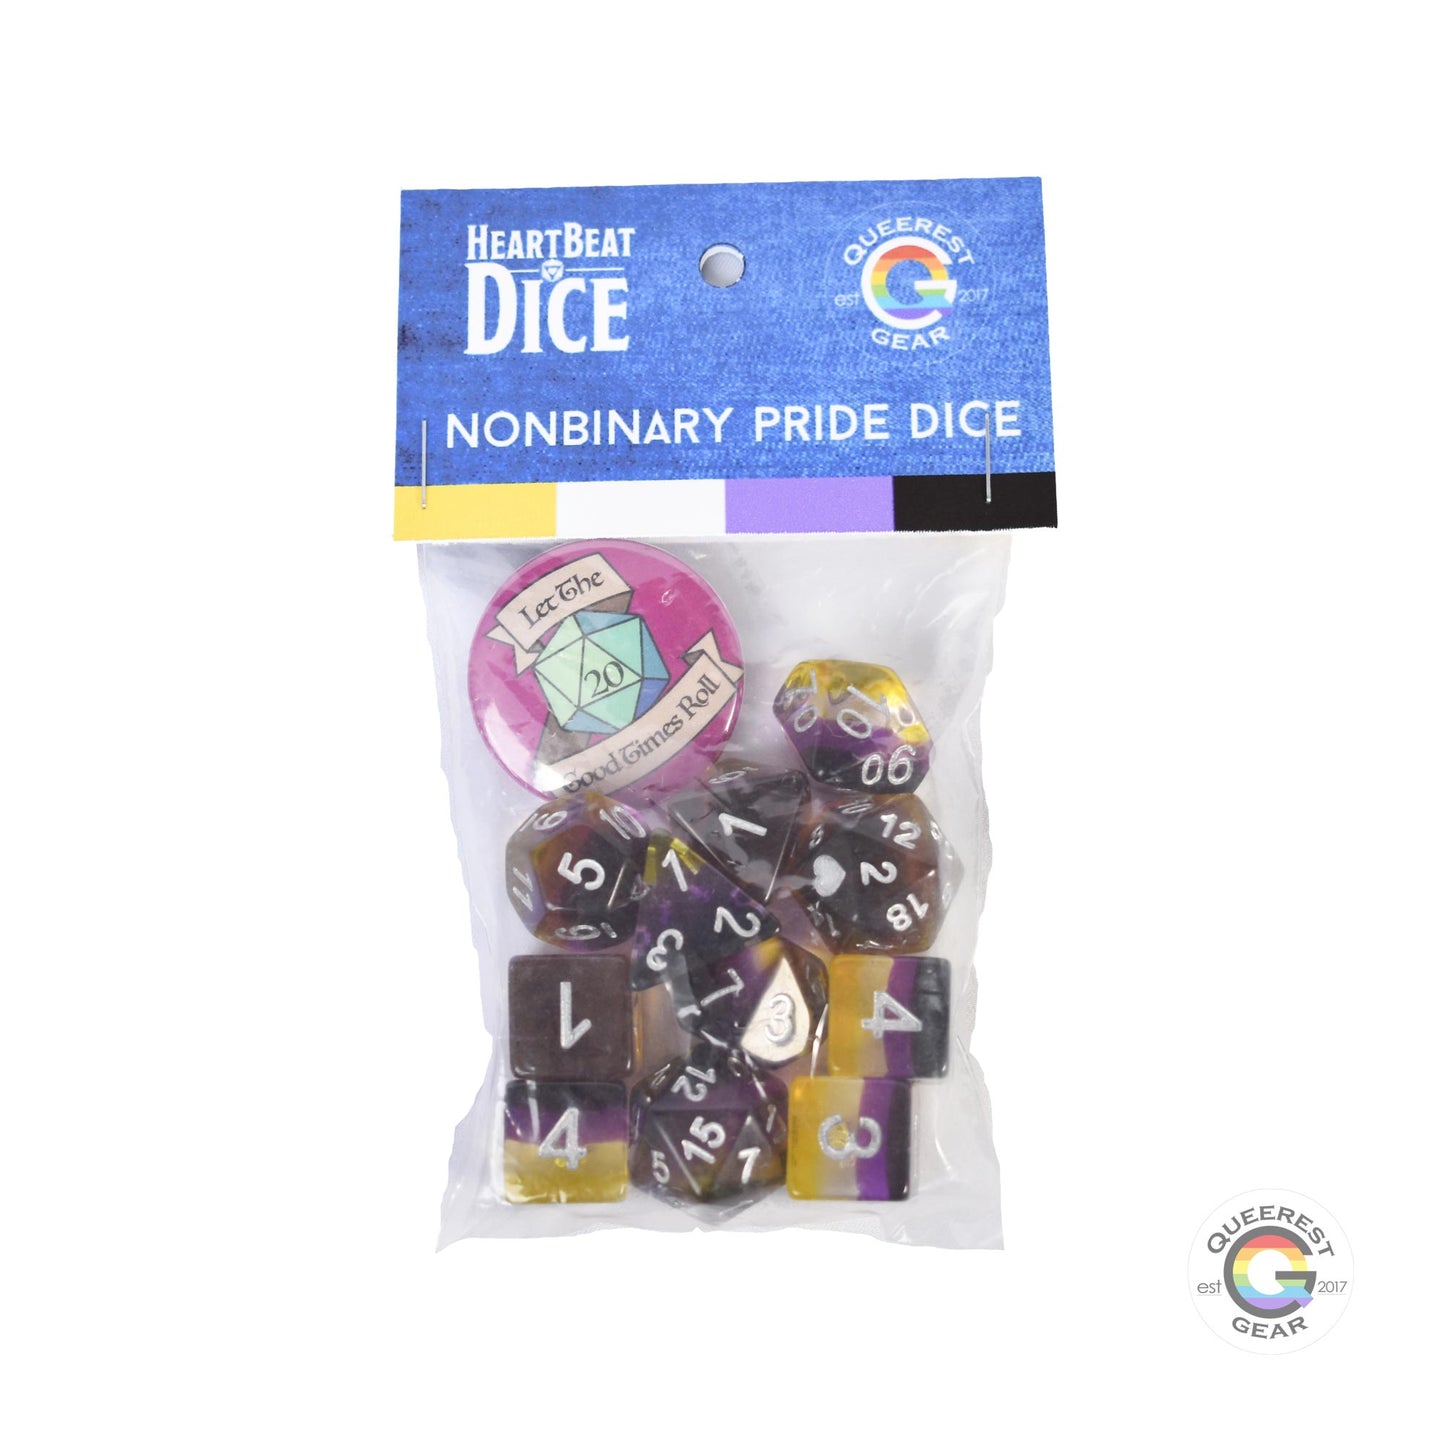 Nonbinary pride dice in their packaging with a free “let the good times roll” button